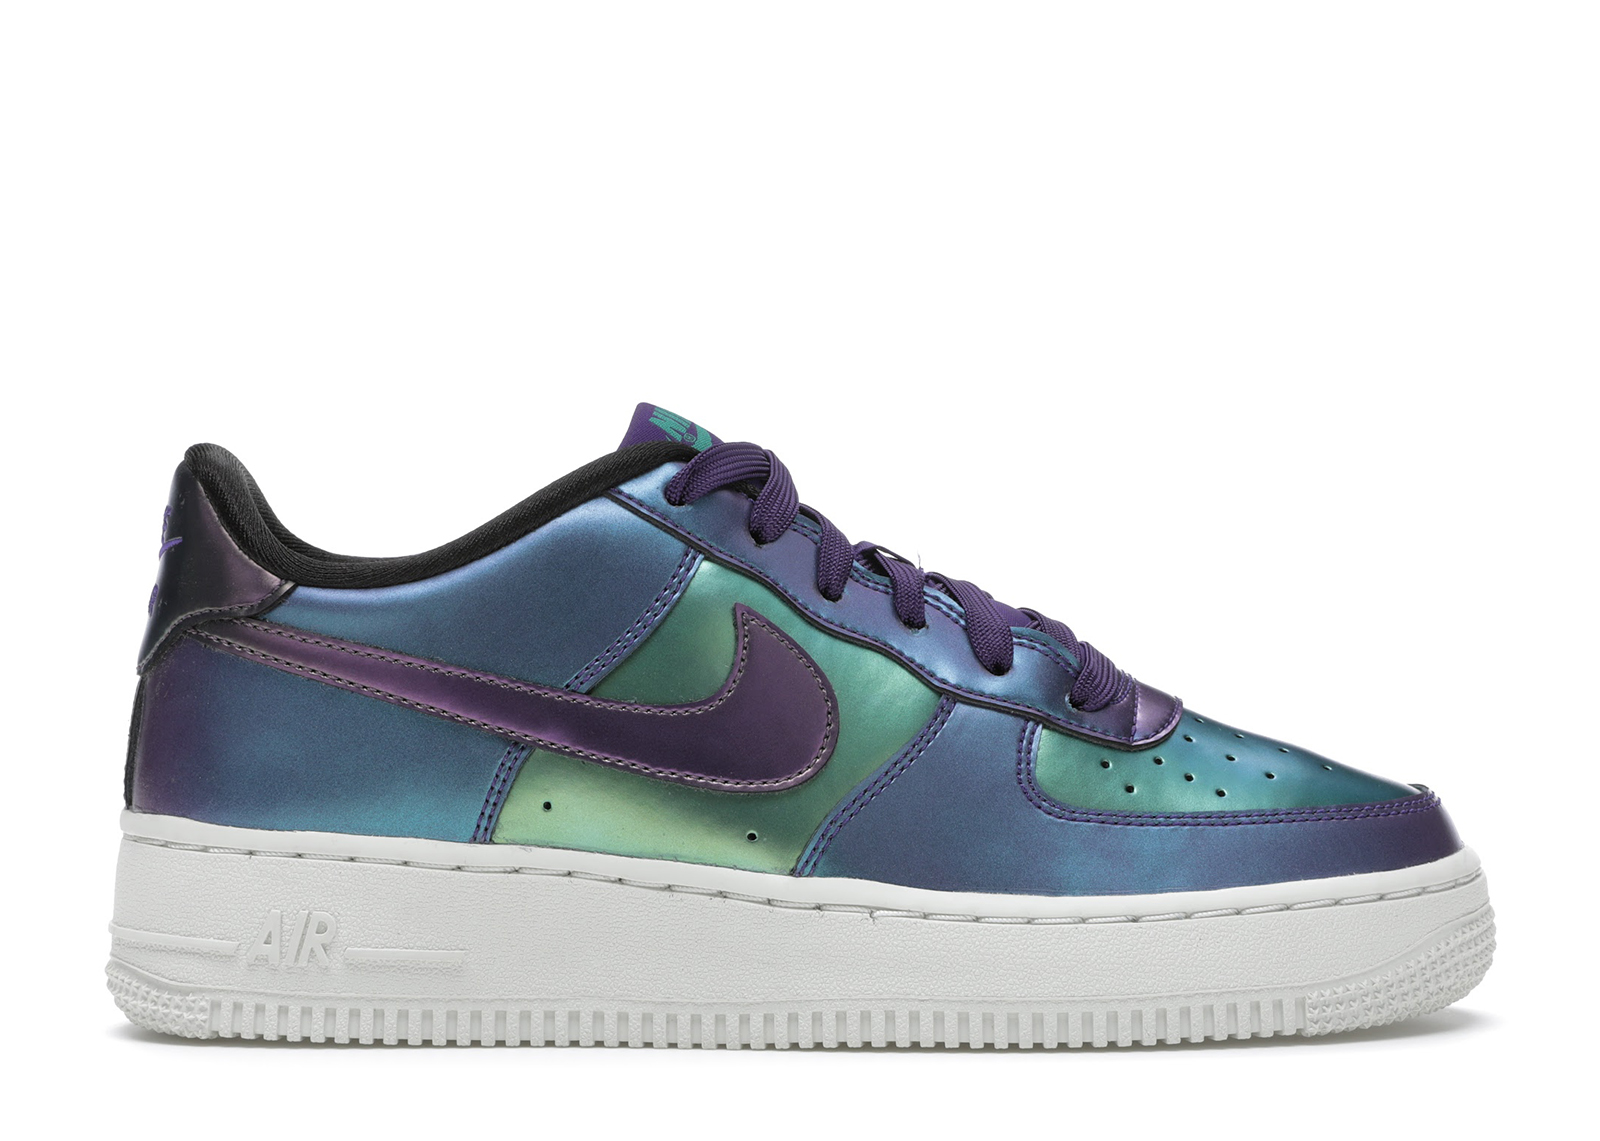 nike air force 1 purple and blue